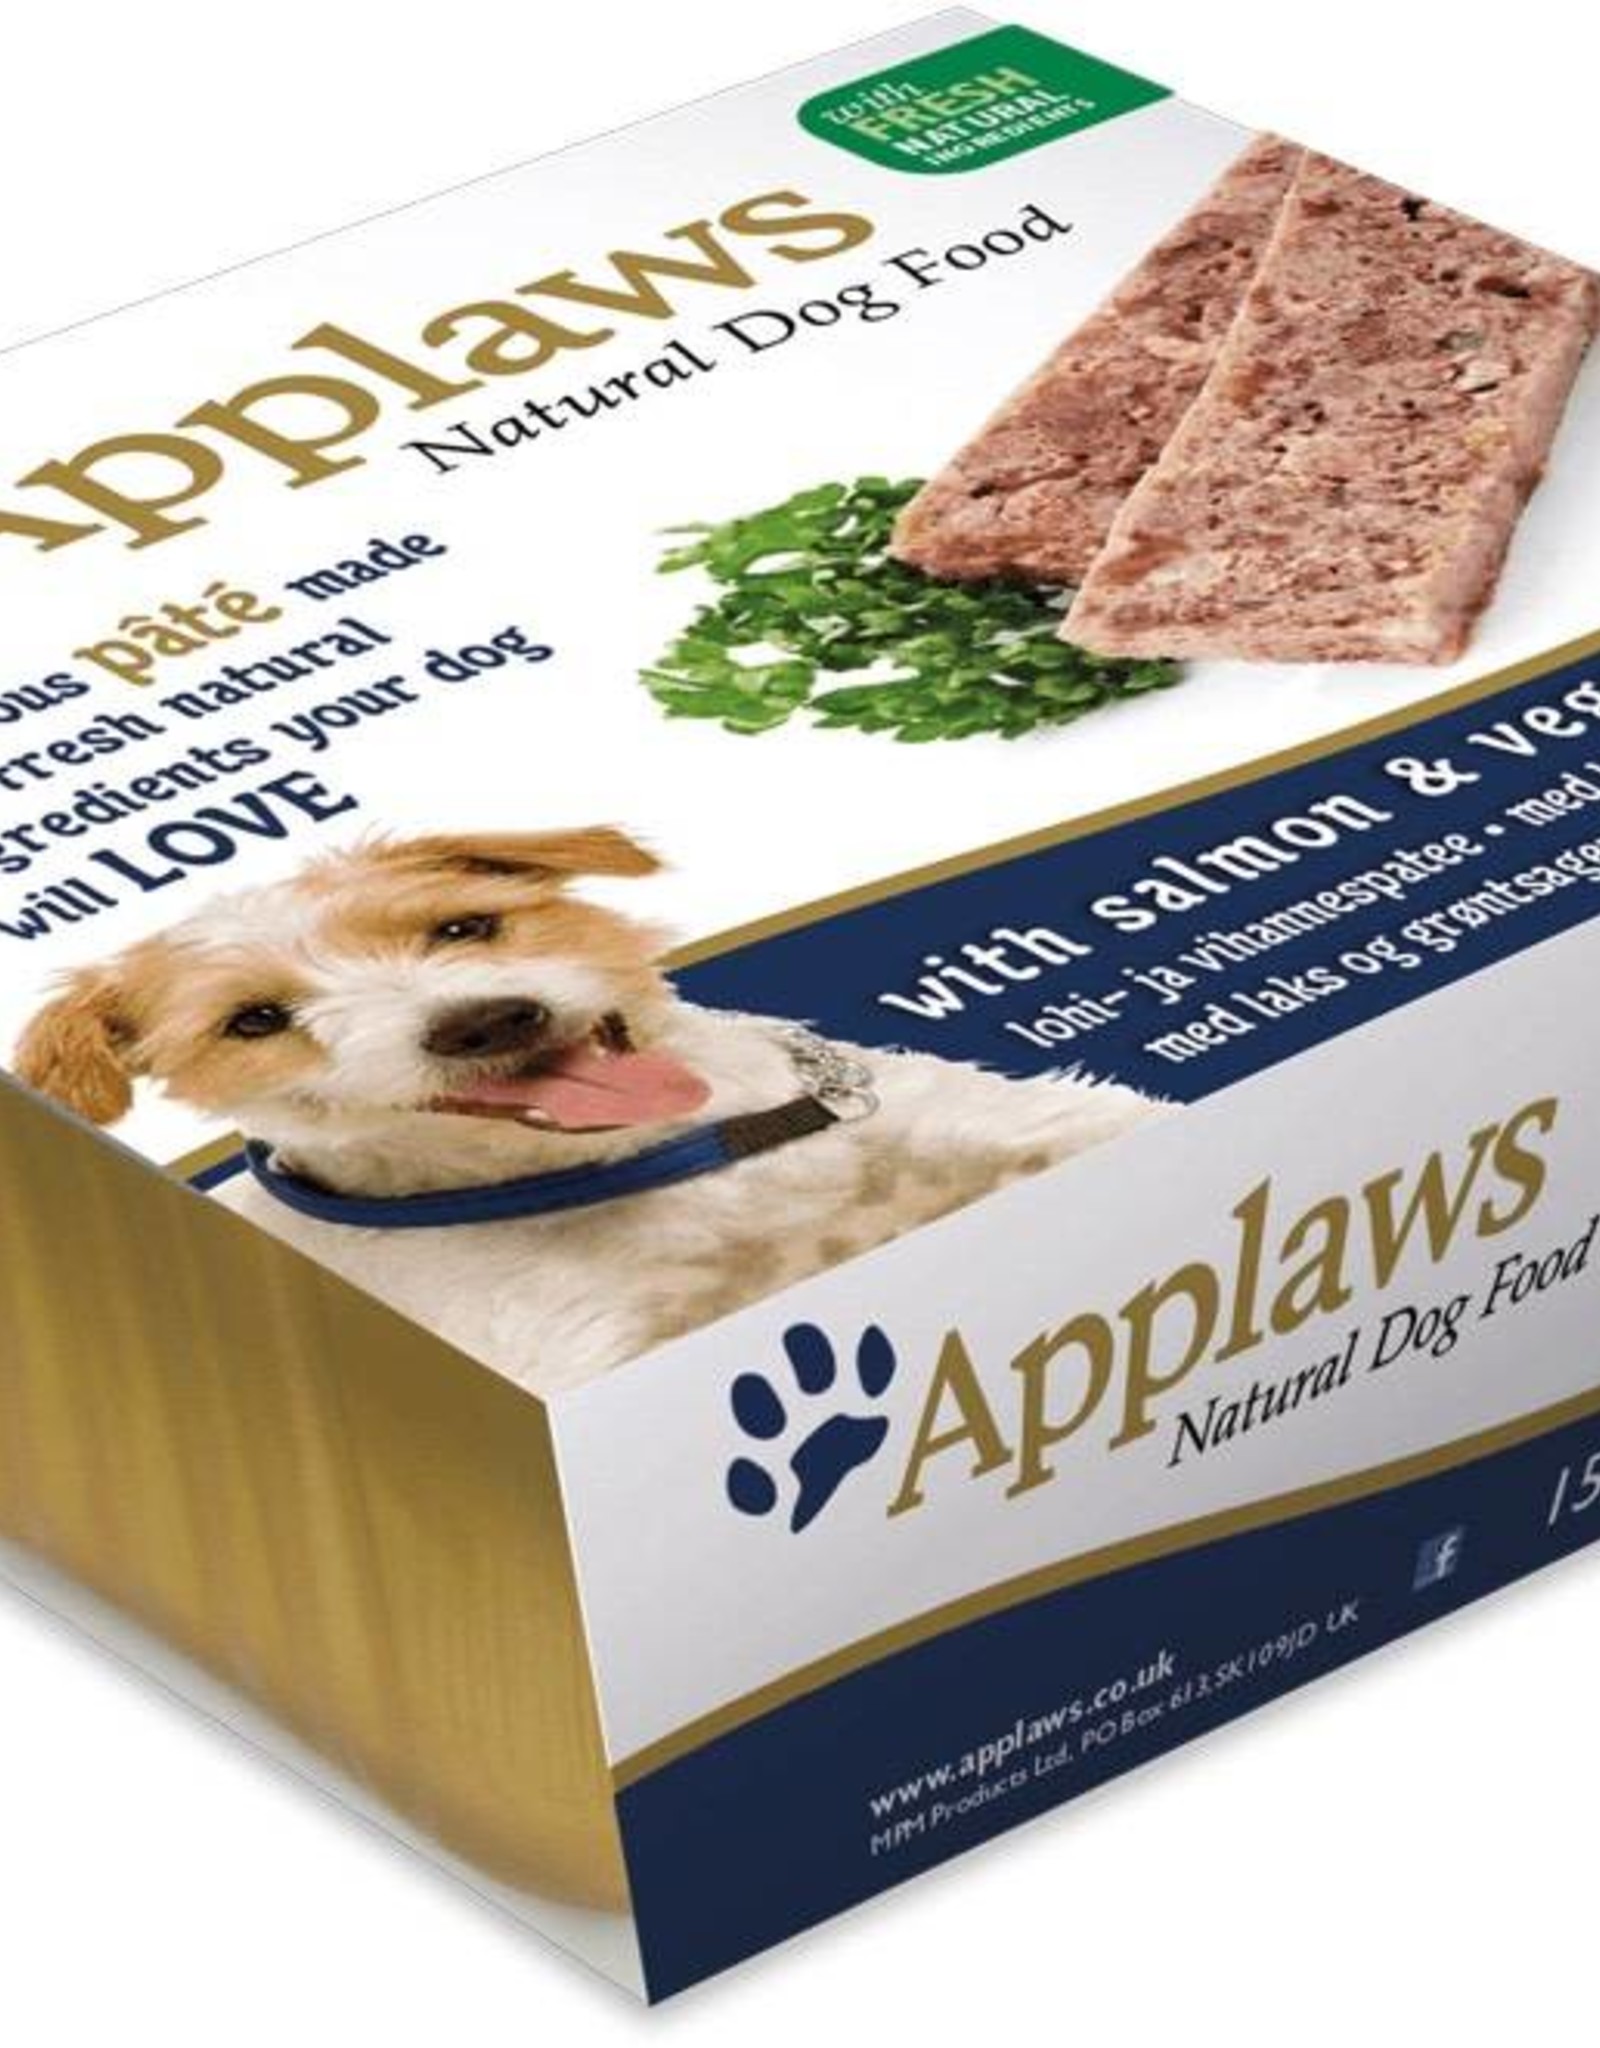 applaws pate